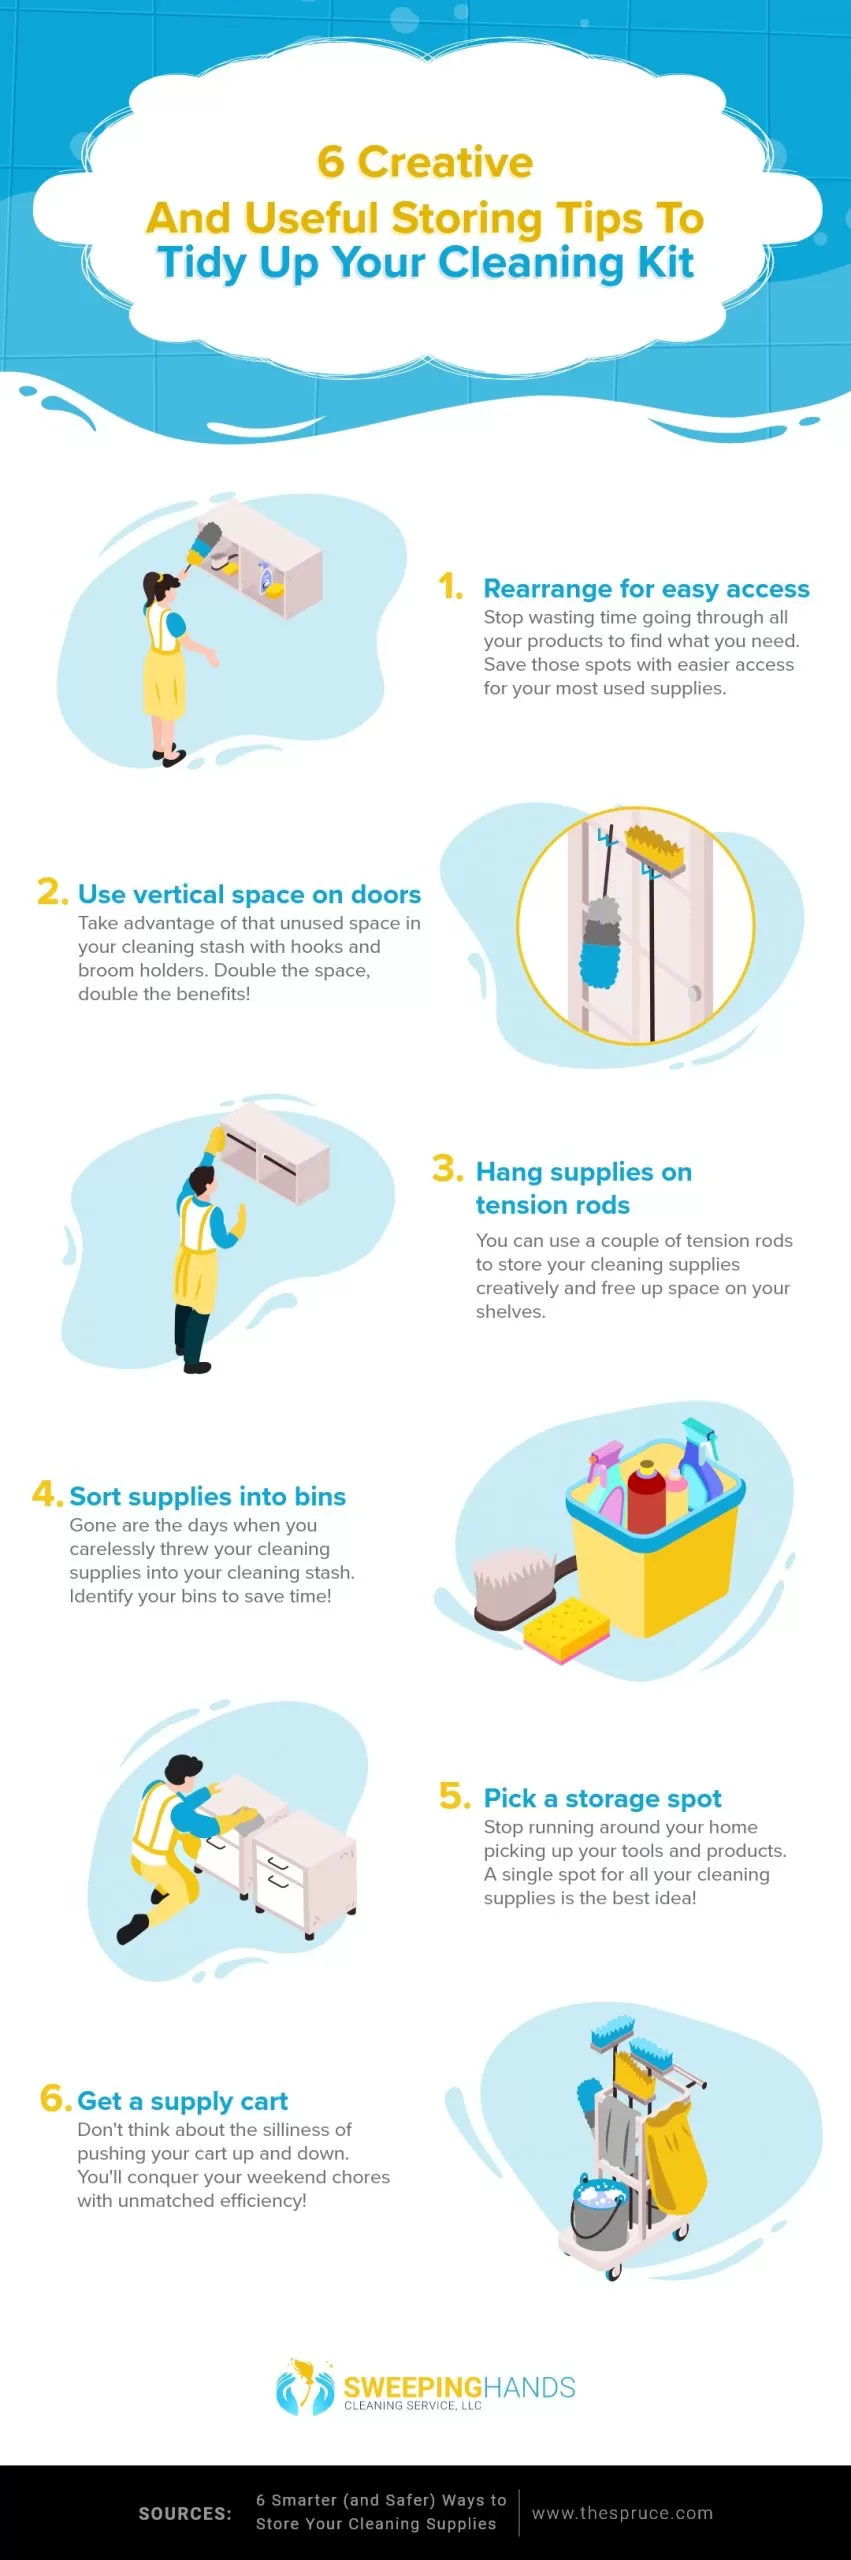 Tips for Storing Cleaning Supplies